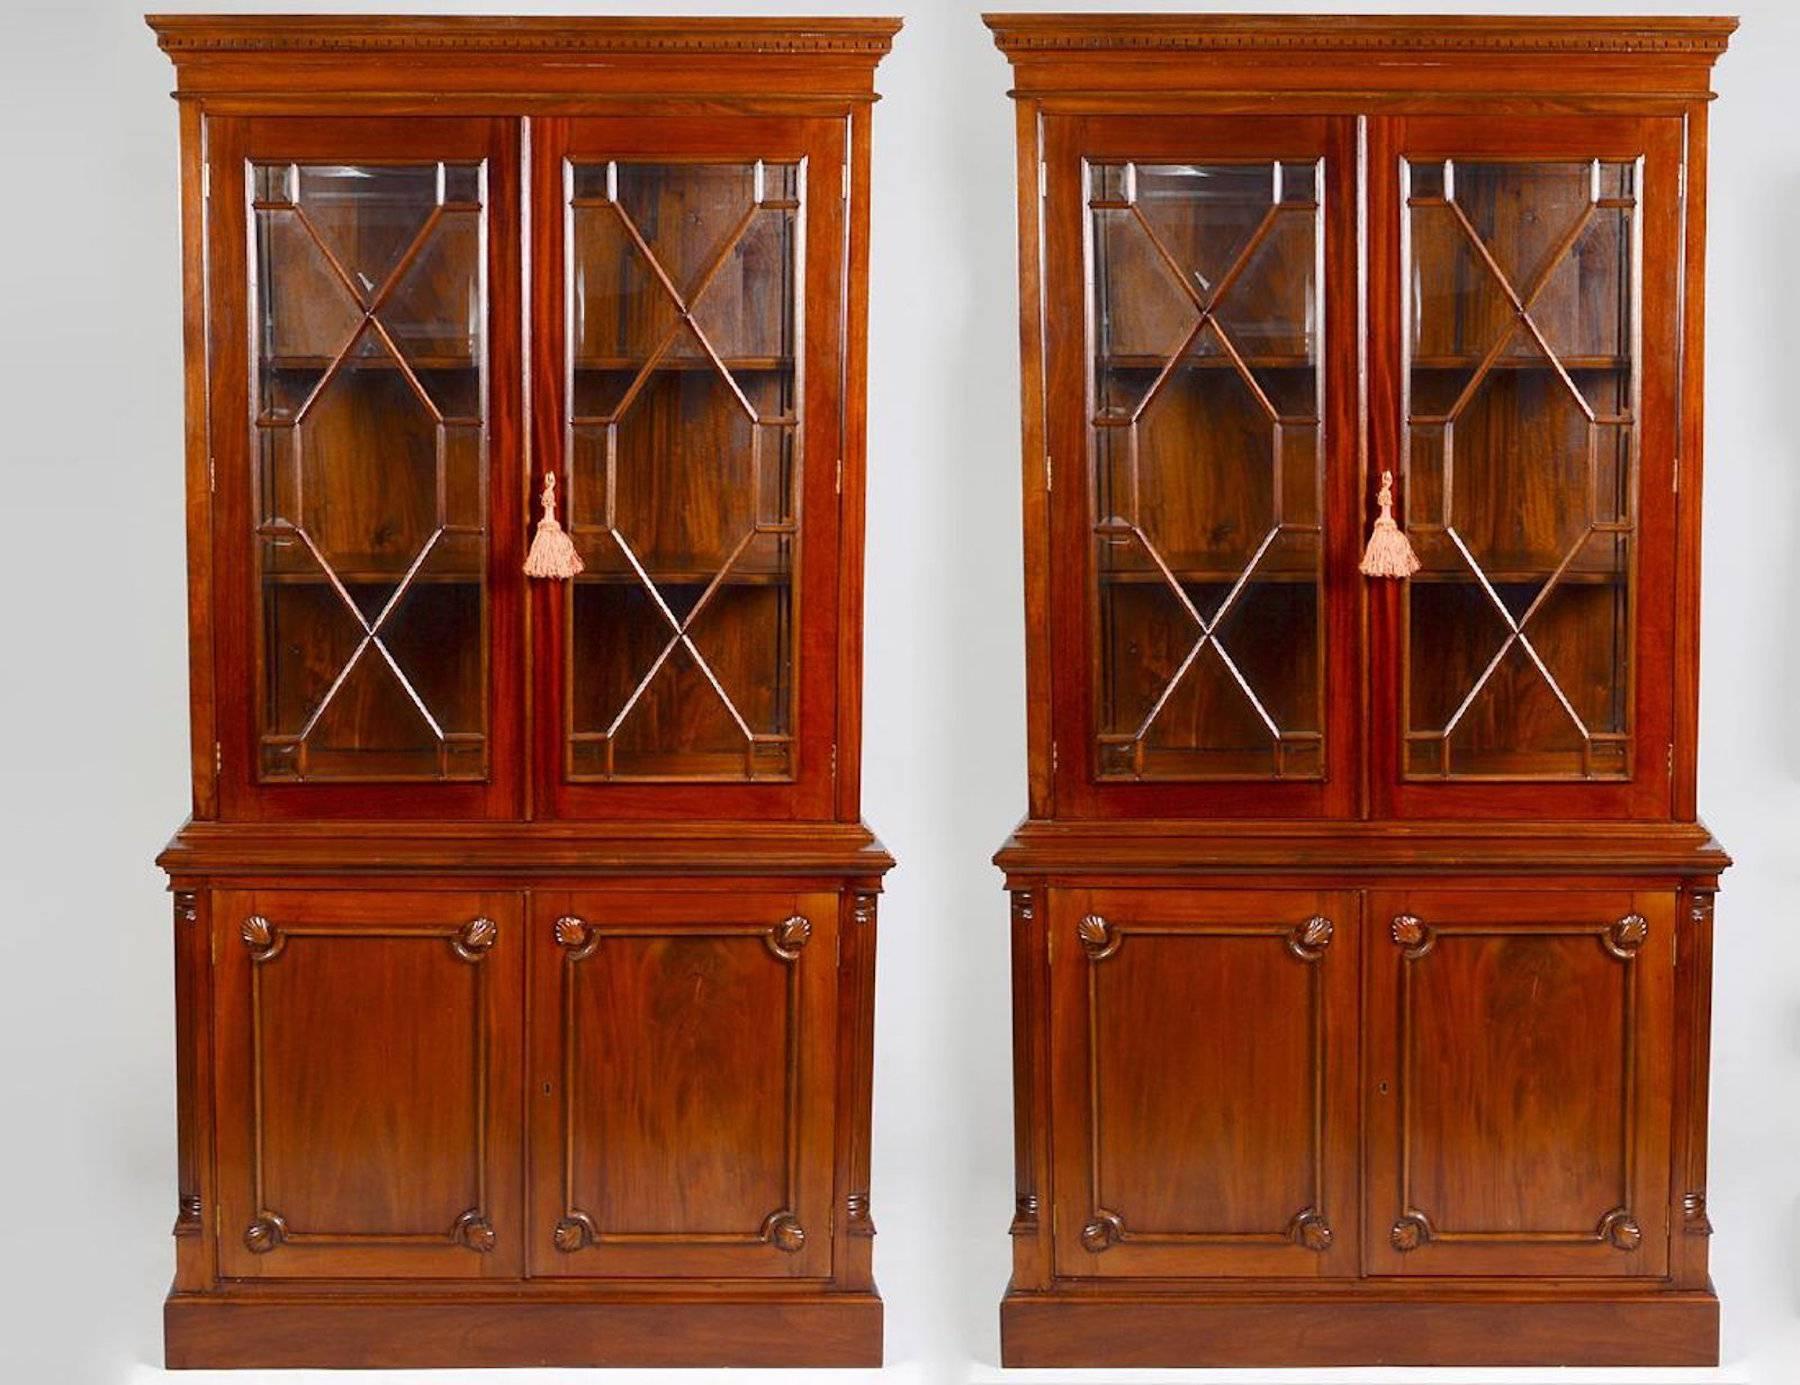 Pair of English Georgian style mahogany bookcases or breakfronts, each one constructed in two pieces the upper cabinet with two mullioned doors and clear side panels, fitted with wood shelves. The lower case with a pair of shell carved paneled blind